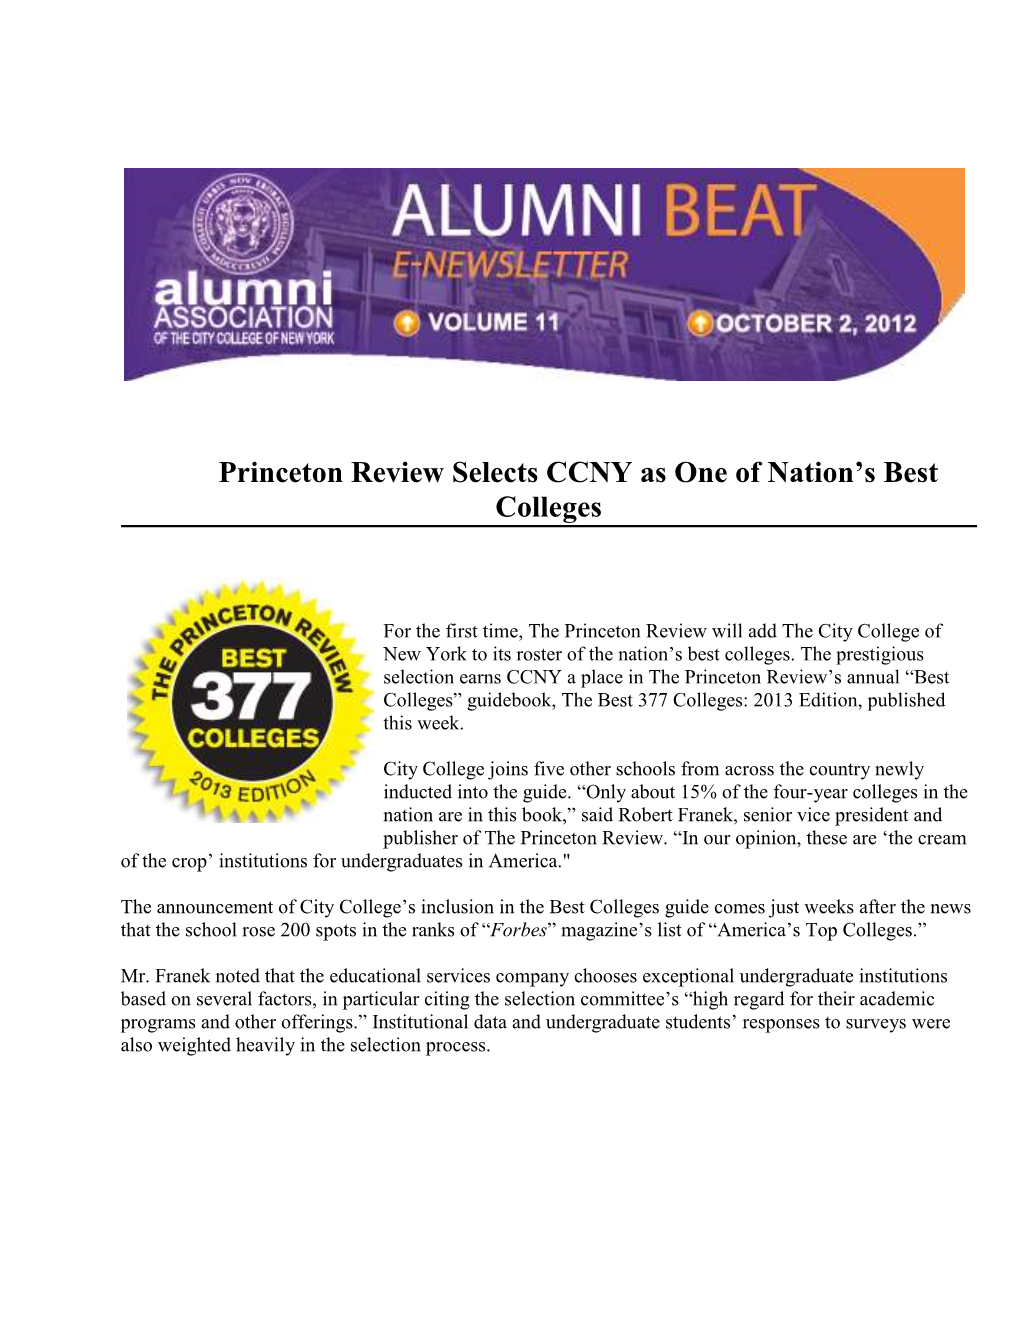 Princeton Review Selects CCNY As One of Nation's Best Colleges